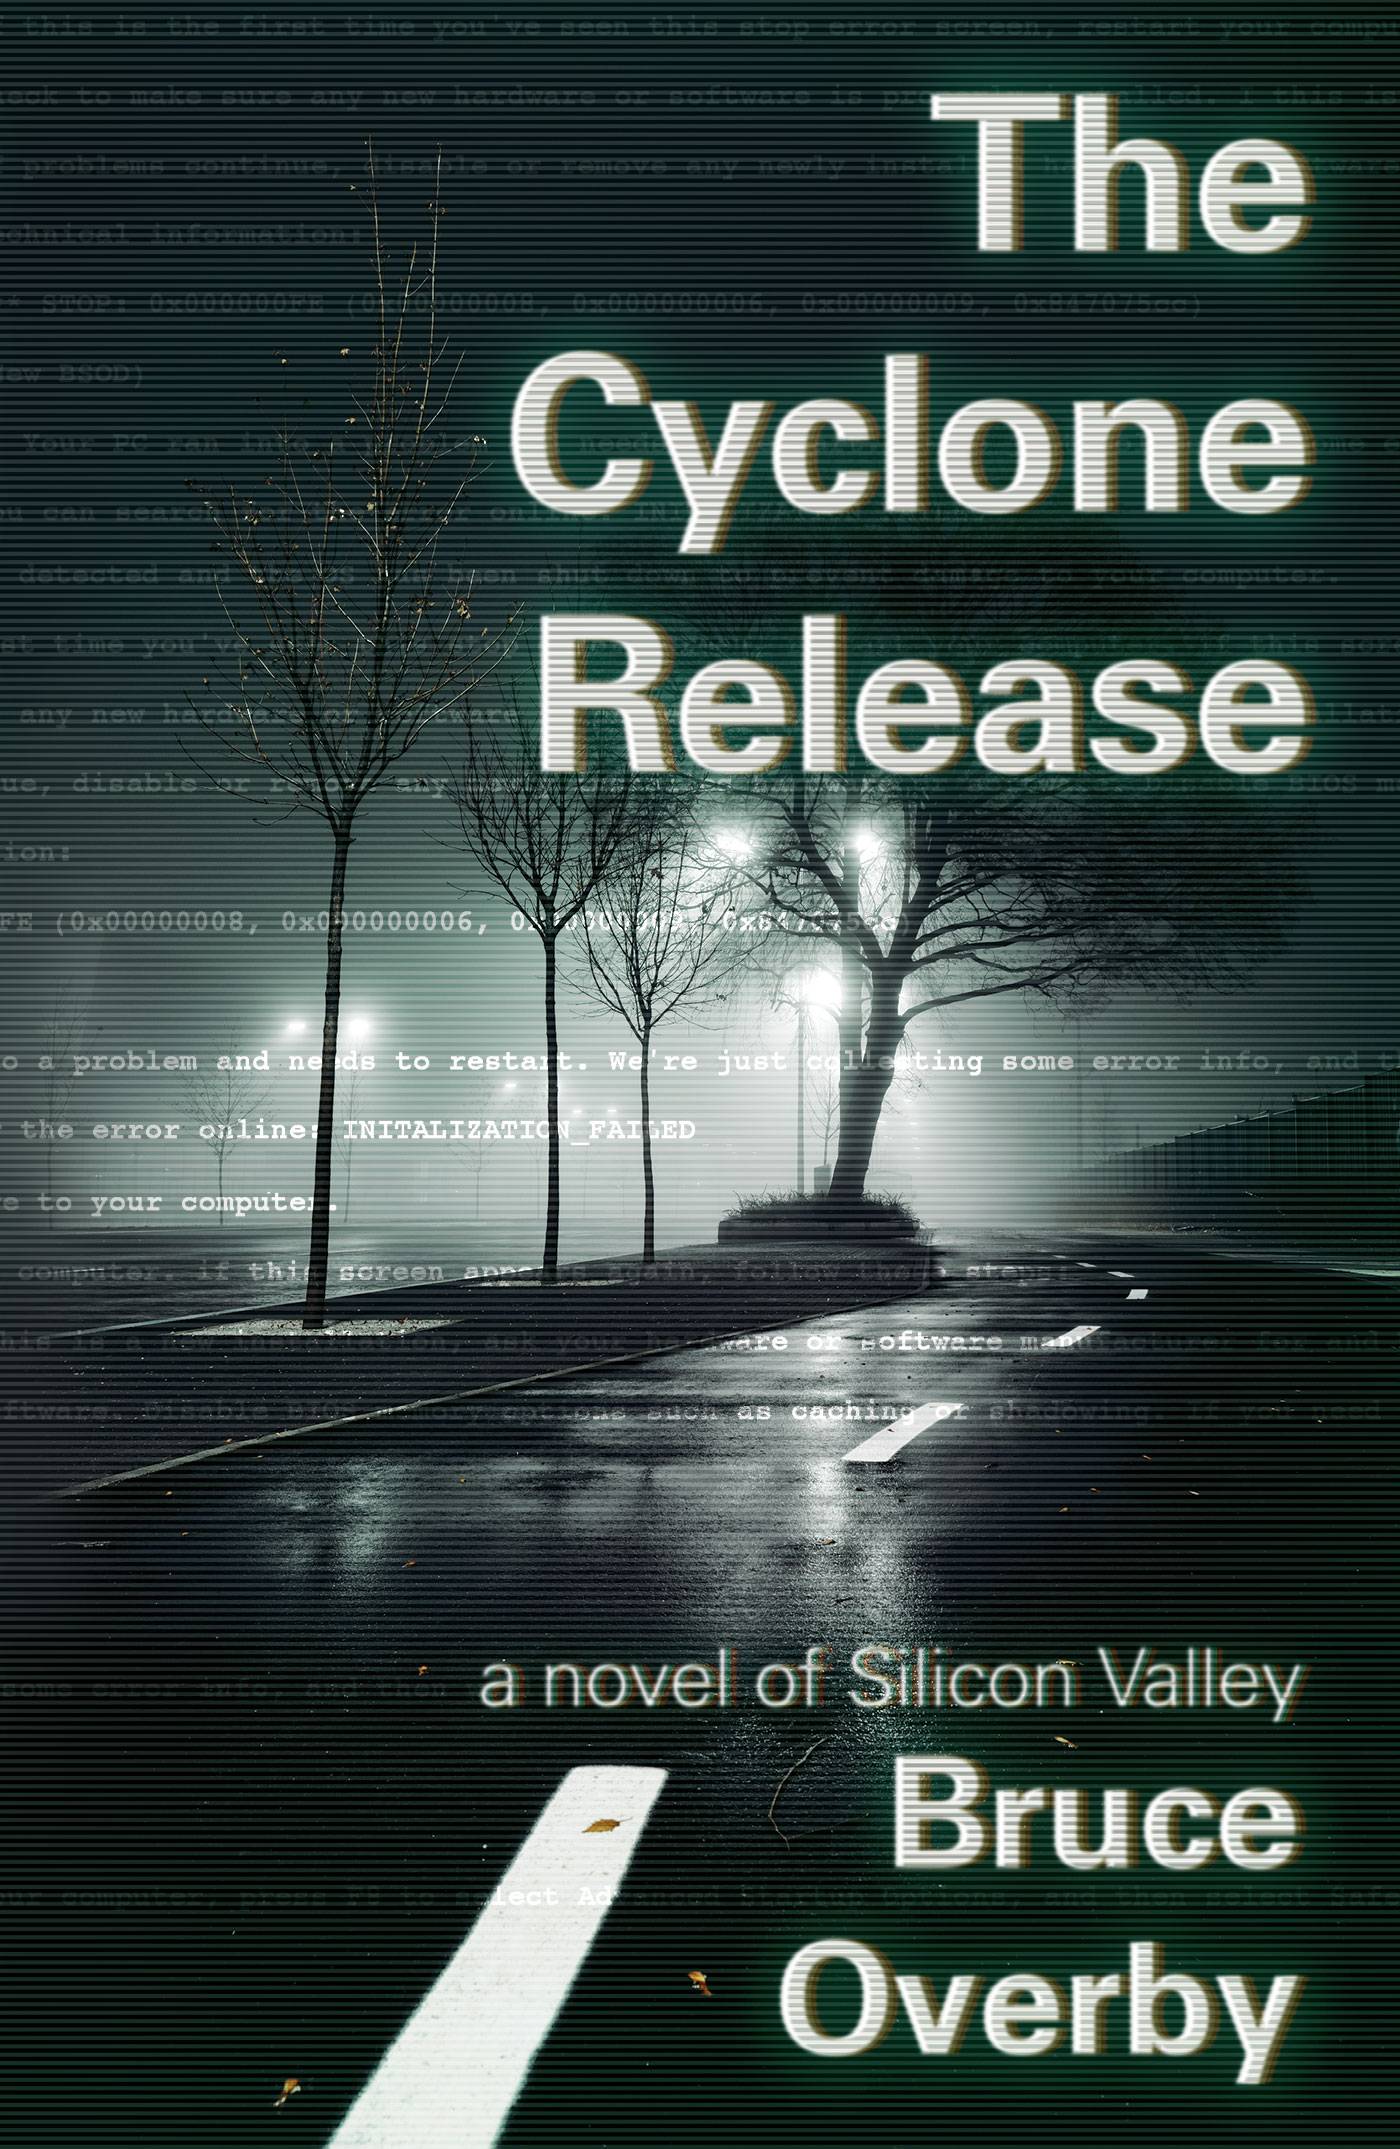 The Cyclone Release: A Novel of Silicon Valley by Bruce Overby. Cover shows a foggy wet road at night overlaid with greenish computer code